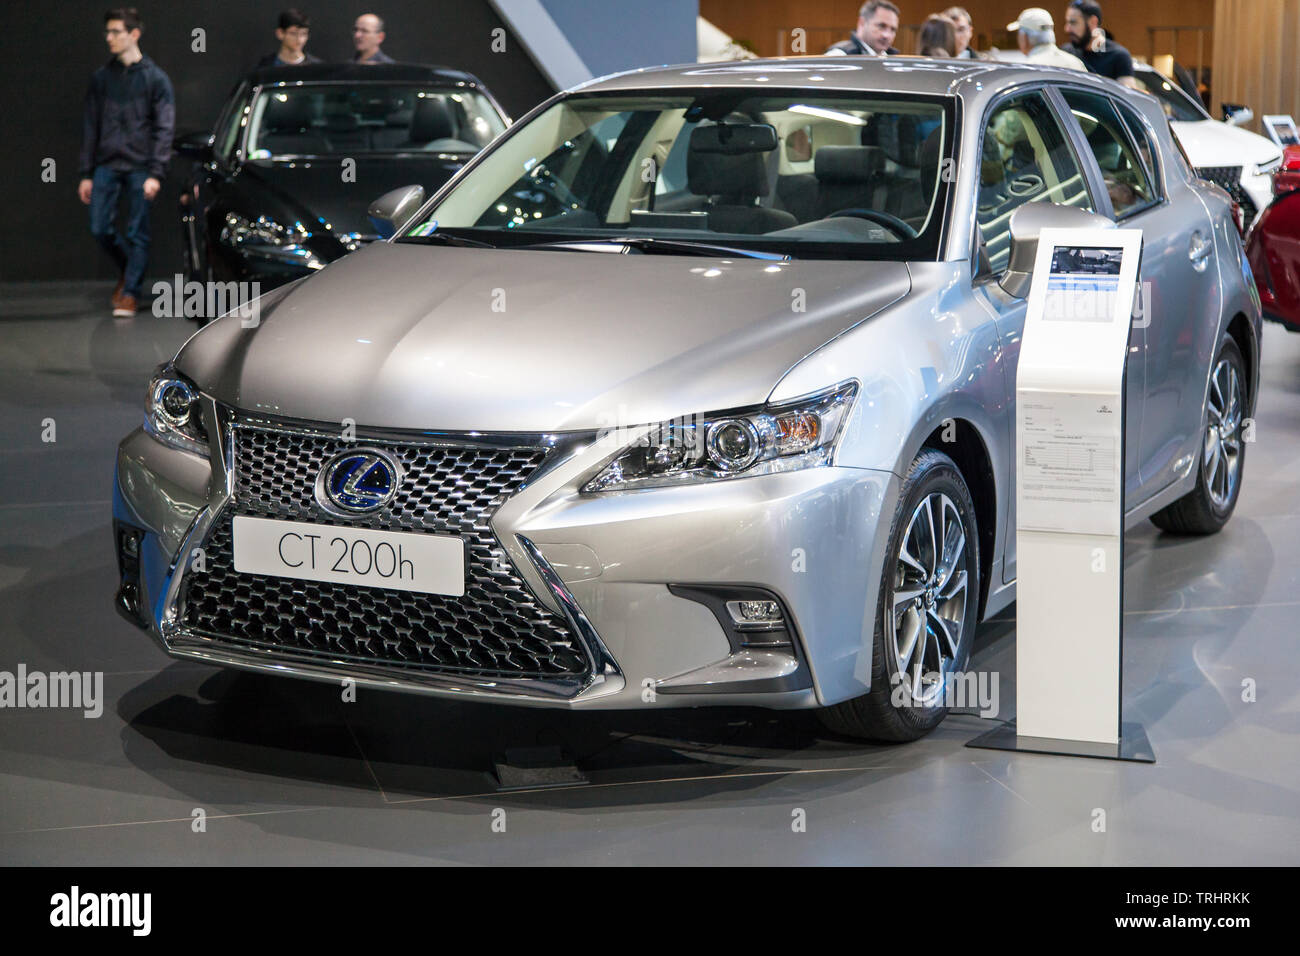 Barcelona, Spain - May 19, 2019: Lexus CT 200h showcased at Automobile Barcelona 2019. Stock Photo